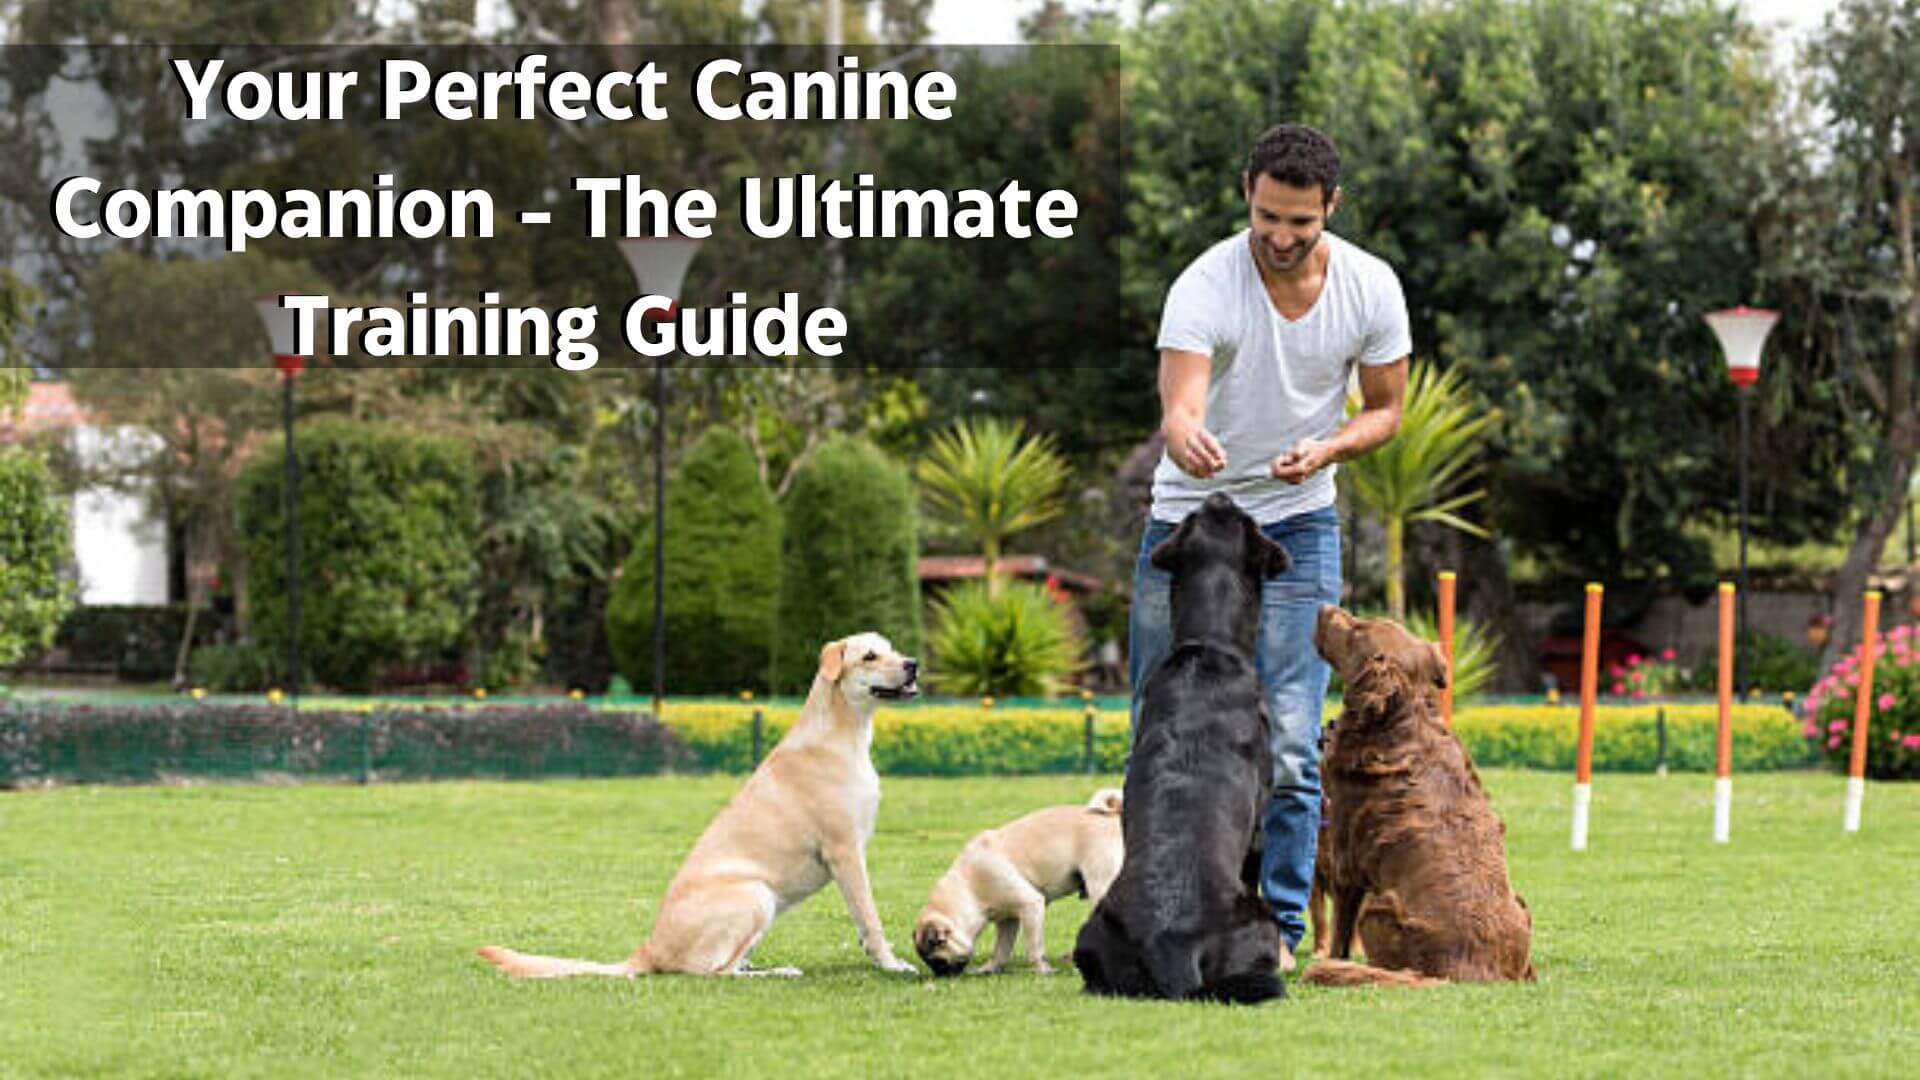 Your Perfect Canine Companion - The Ultimate Training Guide